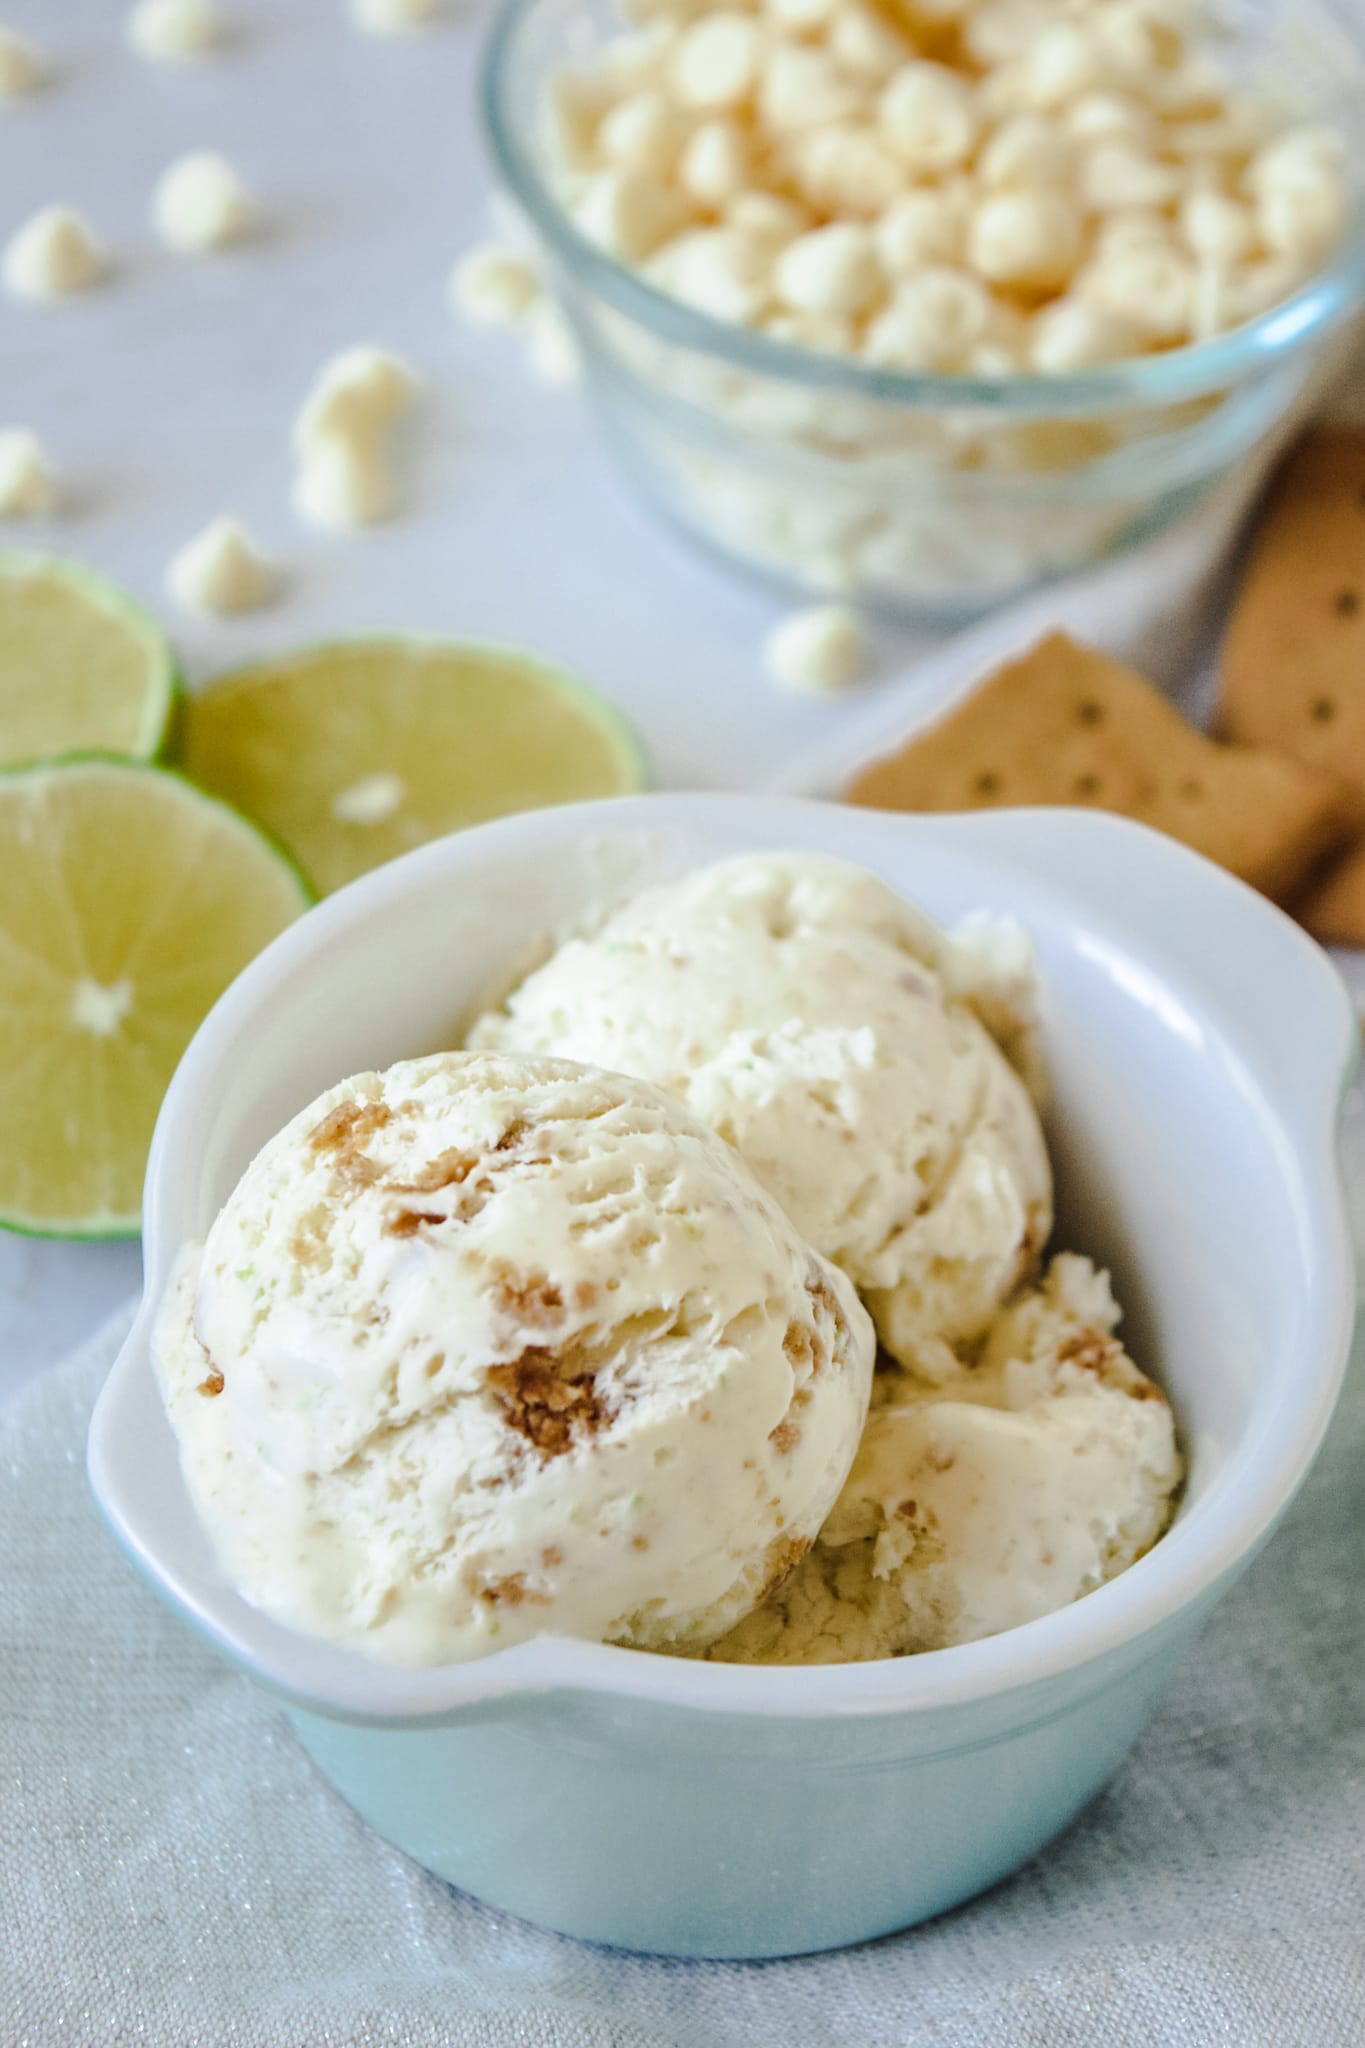 Homemade Key Lime Pie Ice Cream in a Dish